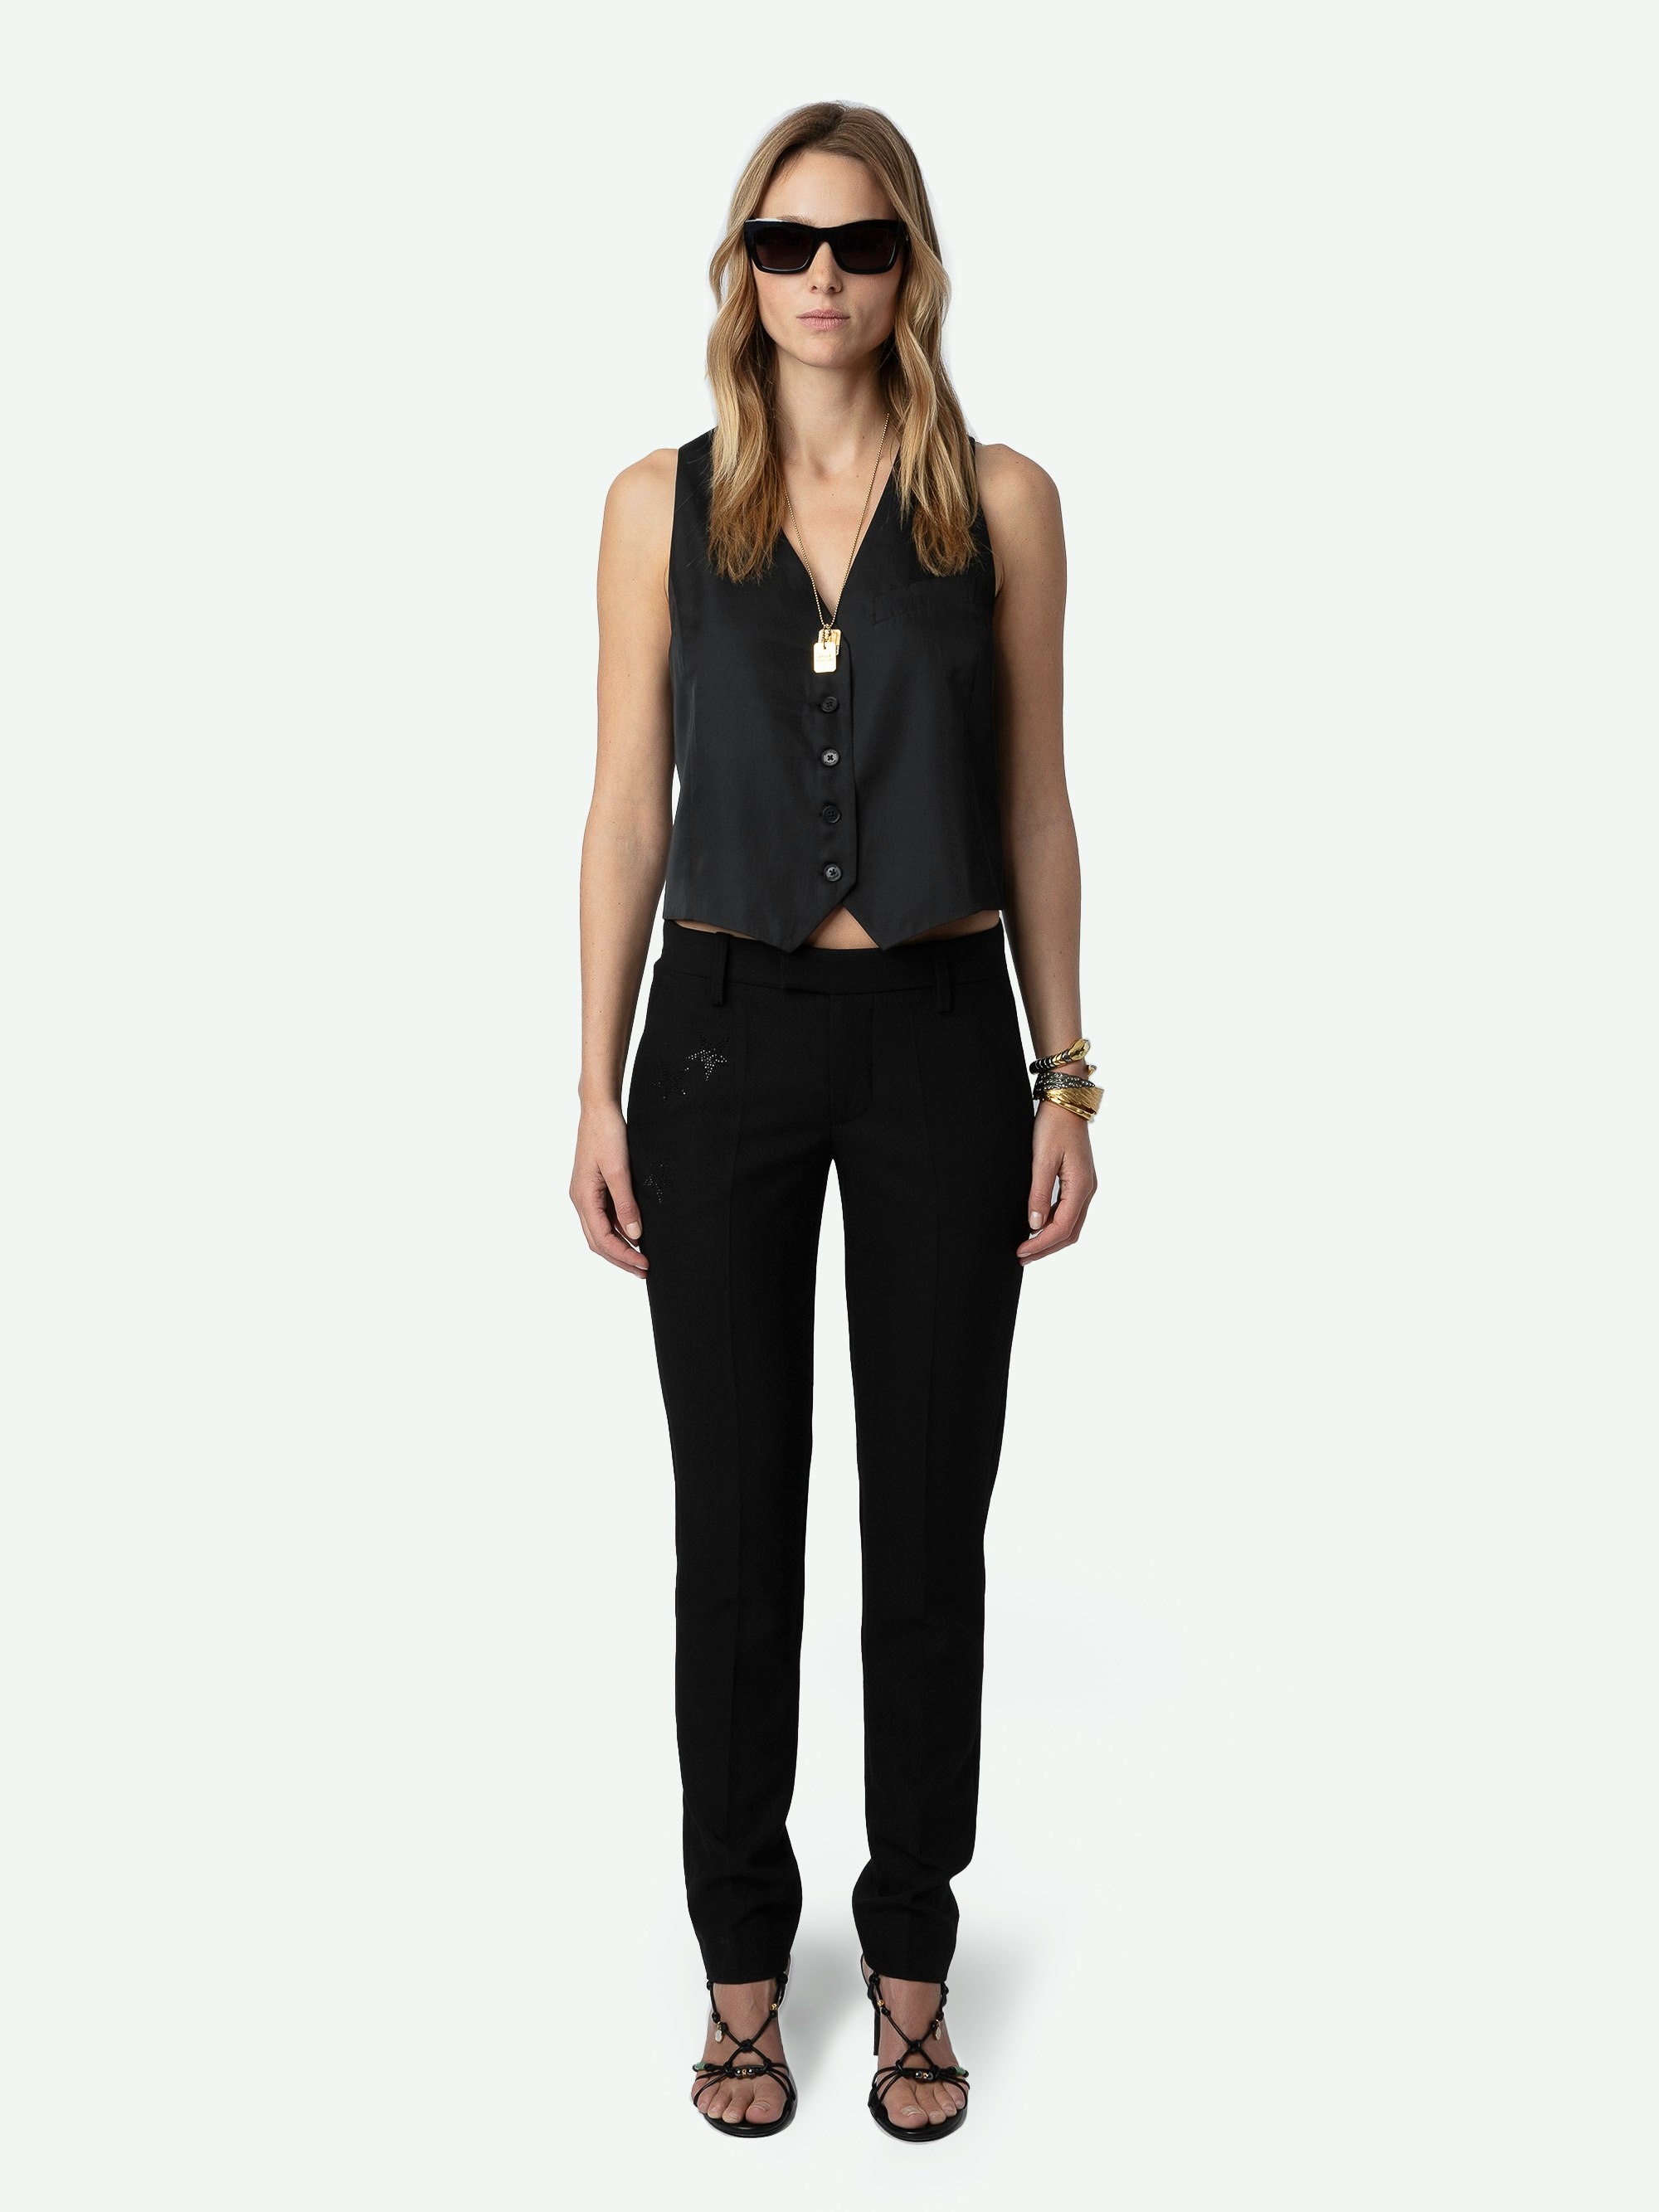 Emaux Satin Top - Sleeveless V-neck button-up waistcoat-style black satin top.